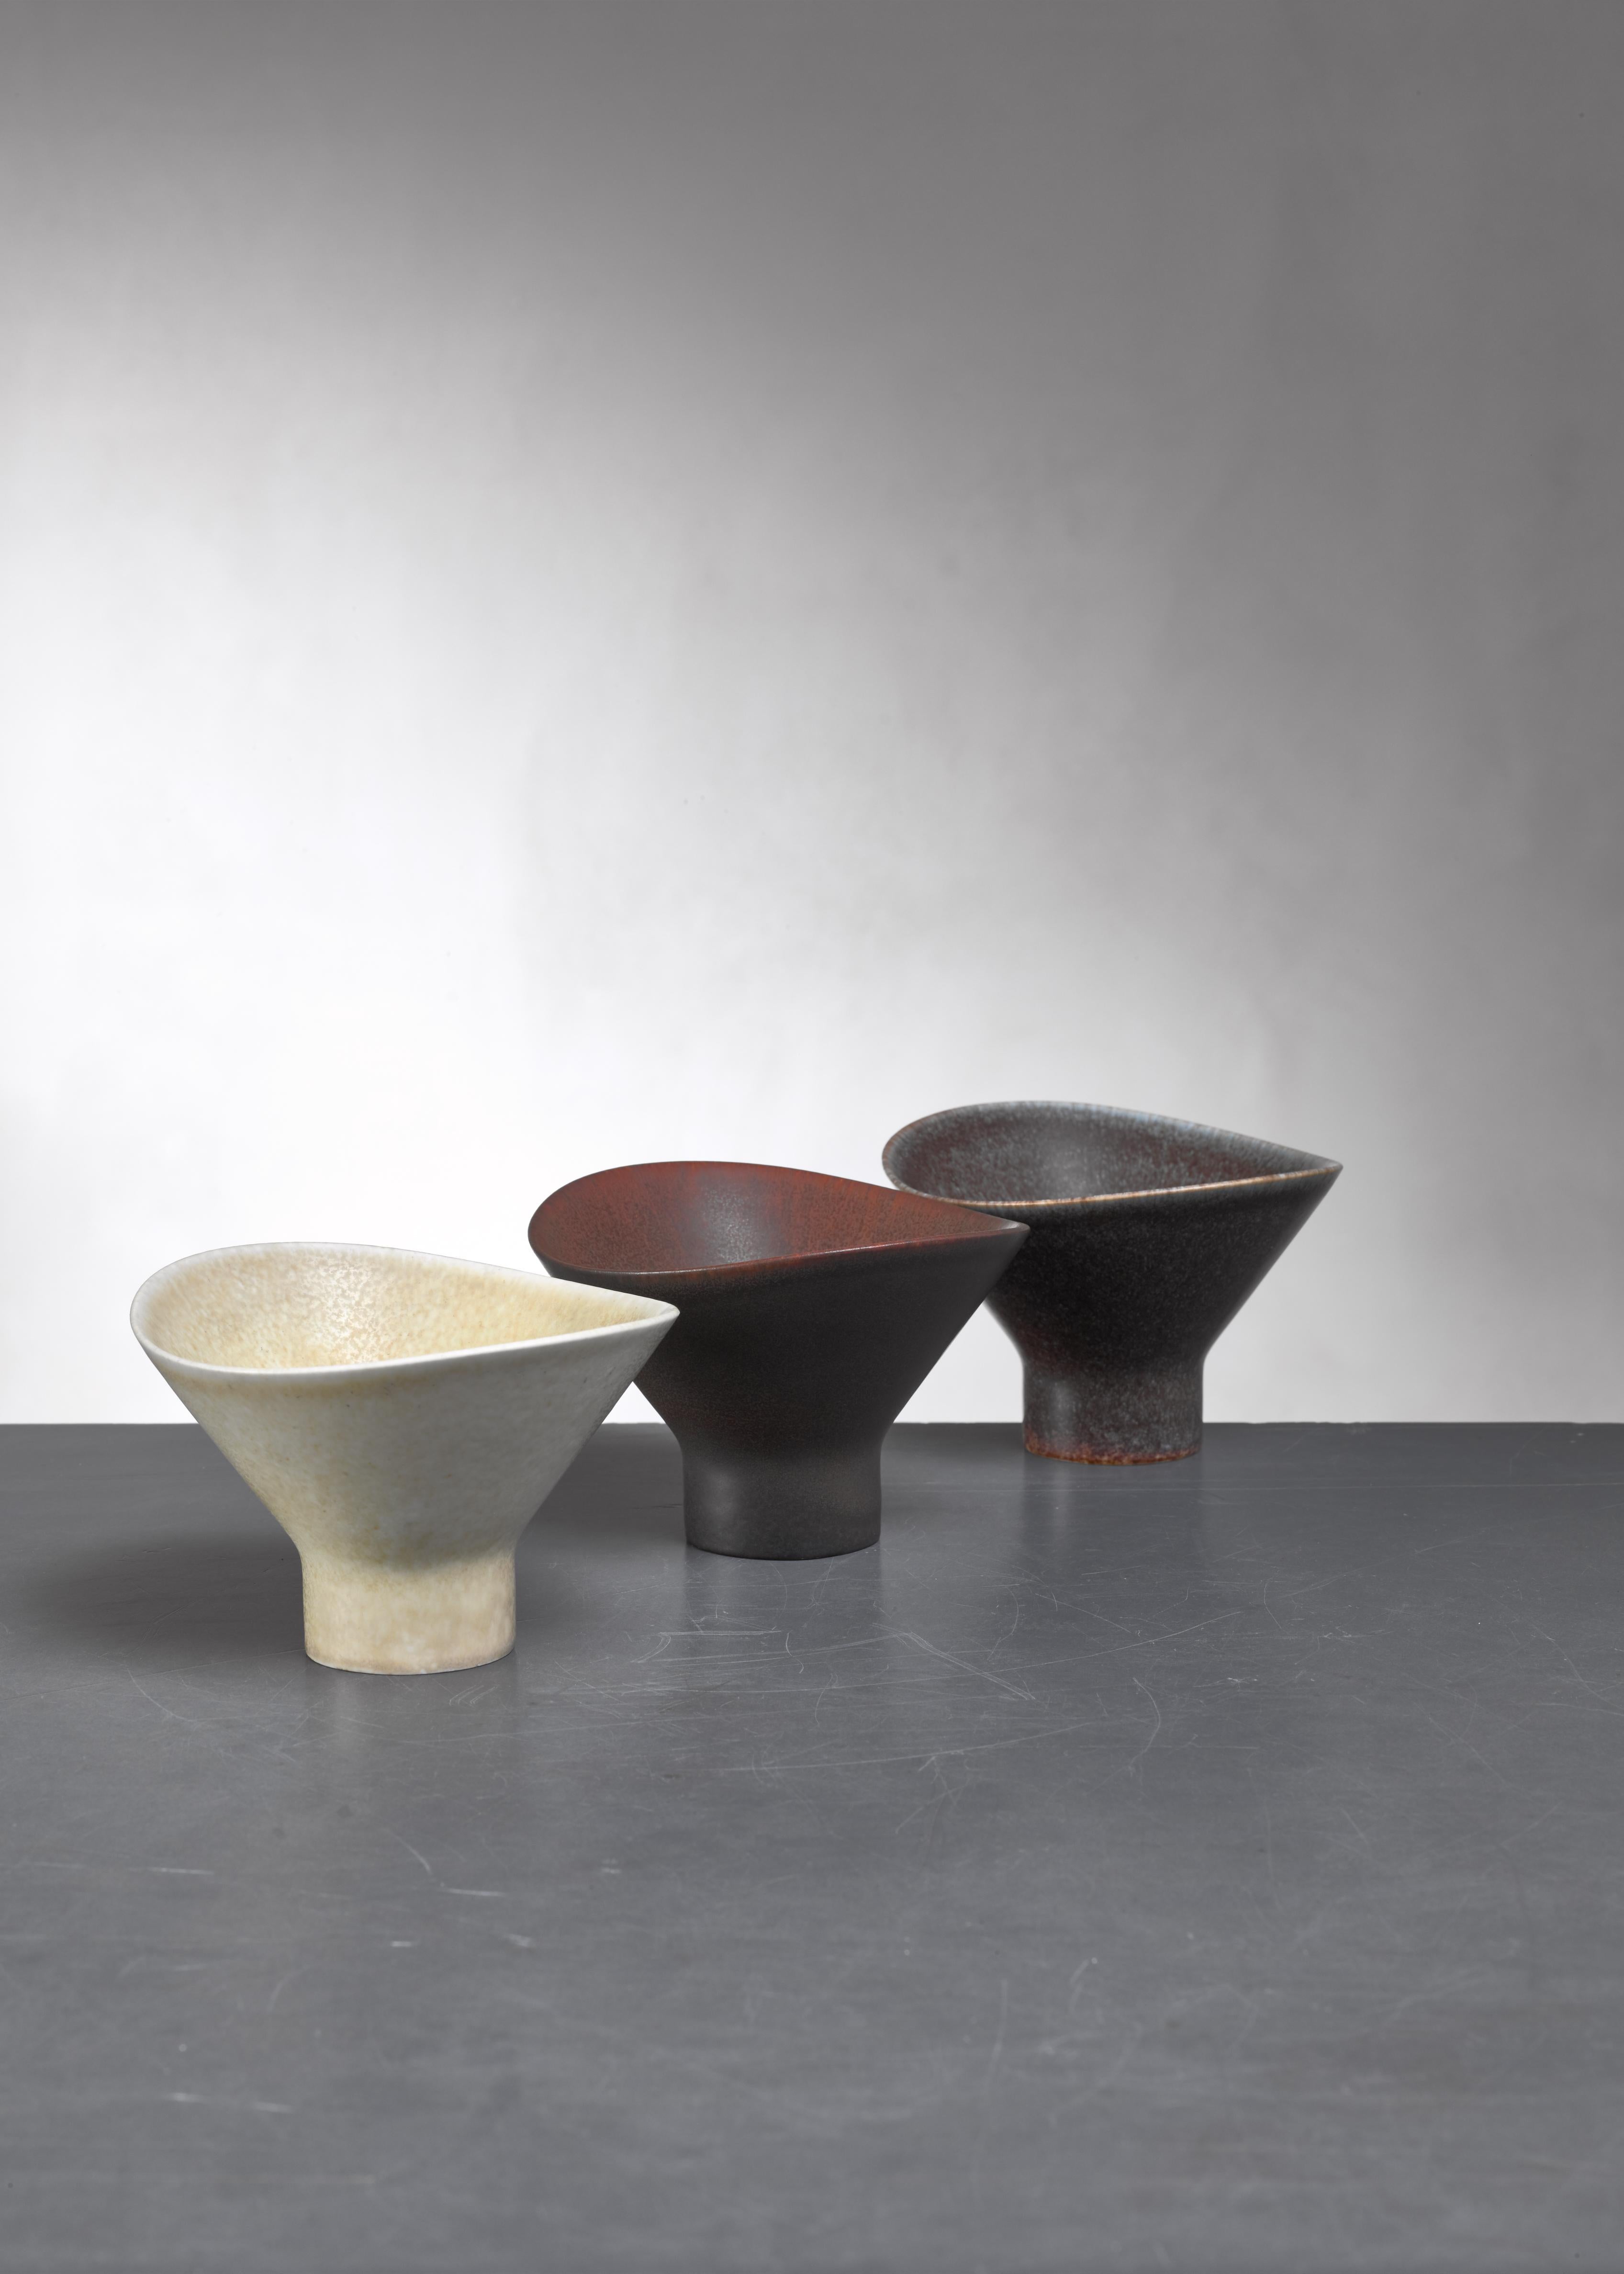 A set of three ceramic bowls, two brown and one beige, by Carl-Harry Stålhane for Rörstrand.

Signed by Stålhane and Rörstrand. We have a large collection of ceramic pieces by Rörstrand available.